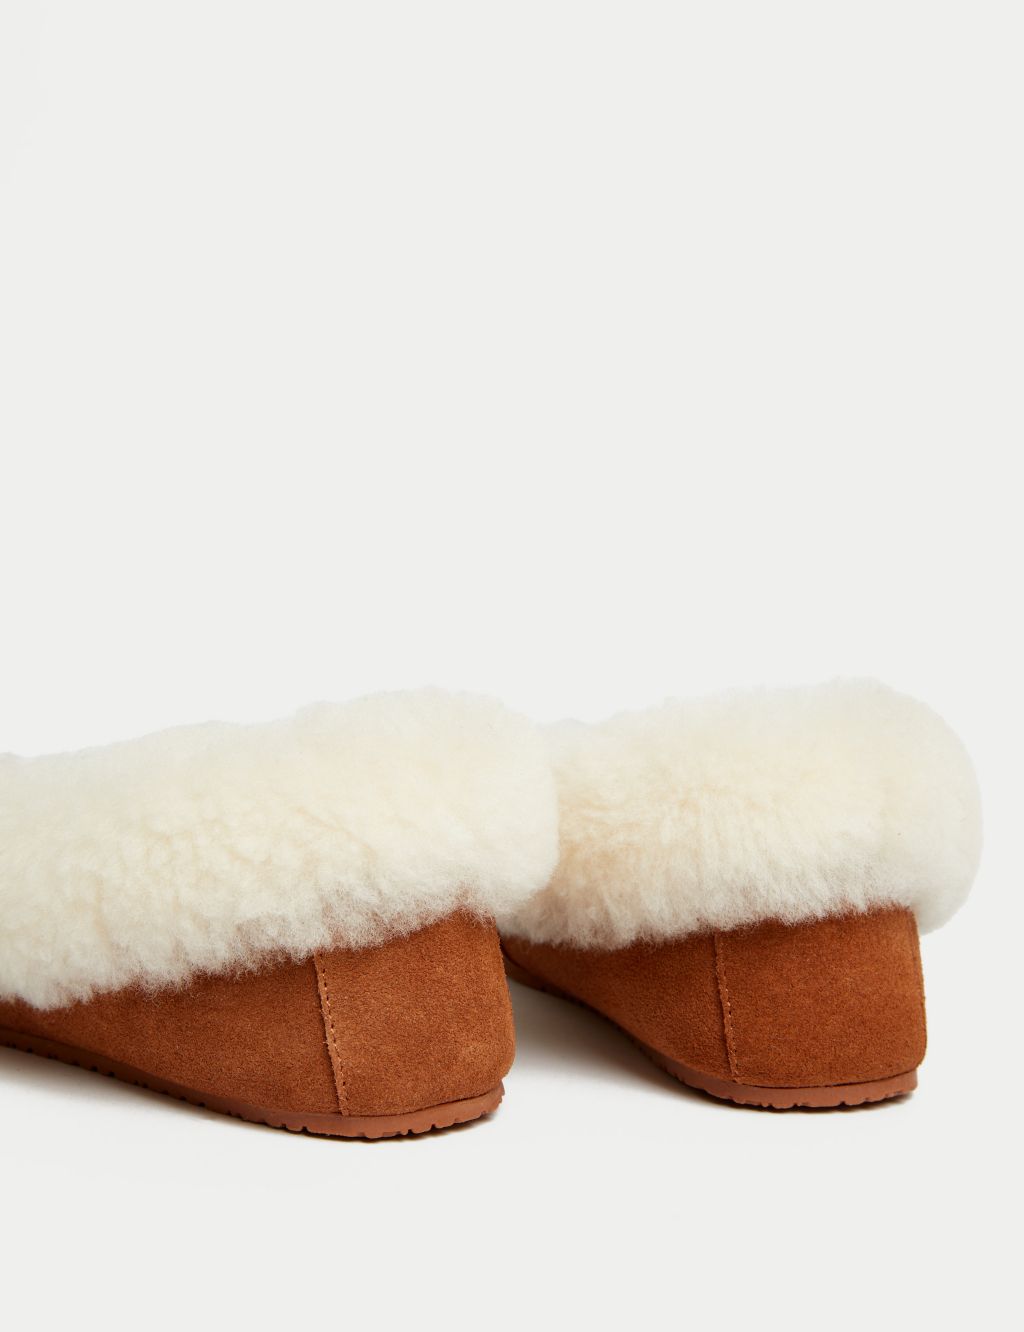 Suede Shearling Cuff Moccasin Slippers image 3